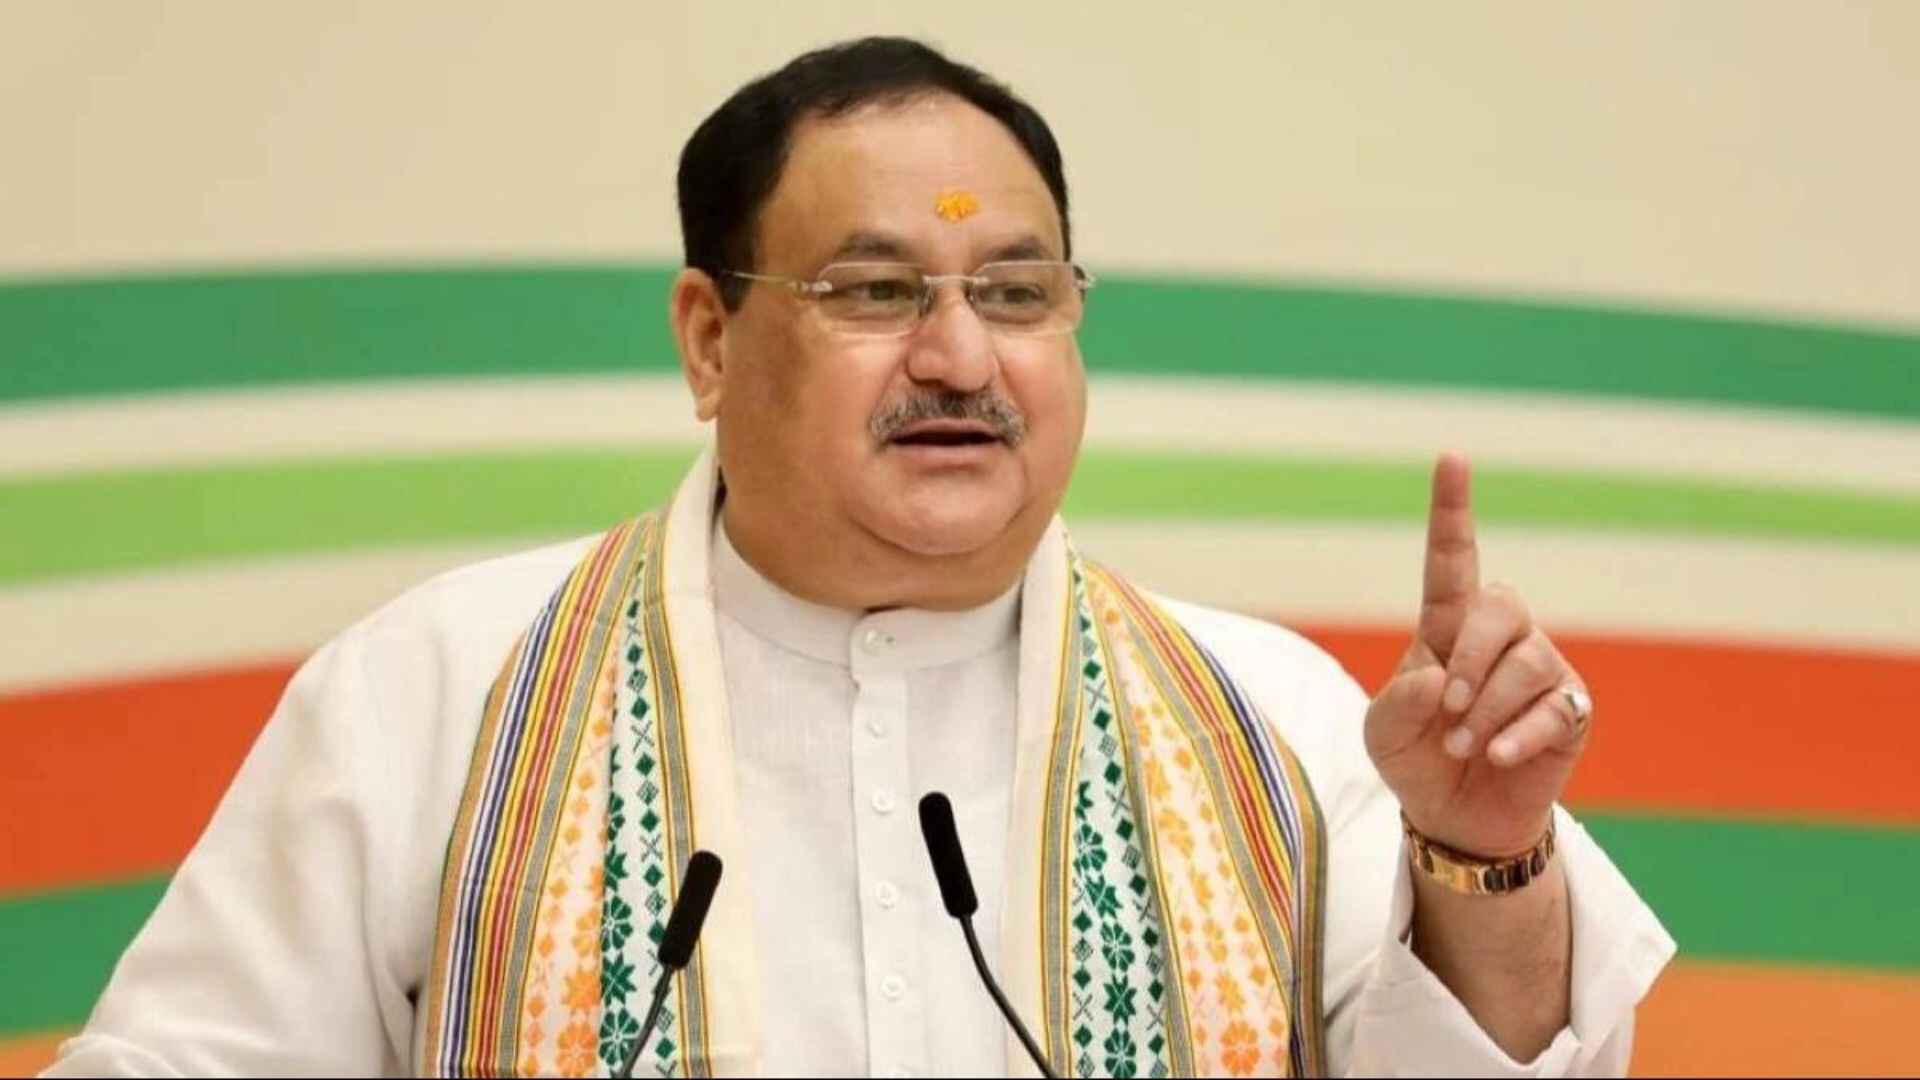 JP Nadda: BJD Govt. Does The Work Of Giving Bribes For Votes